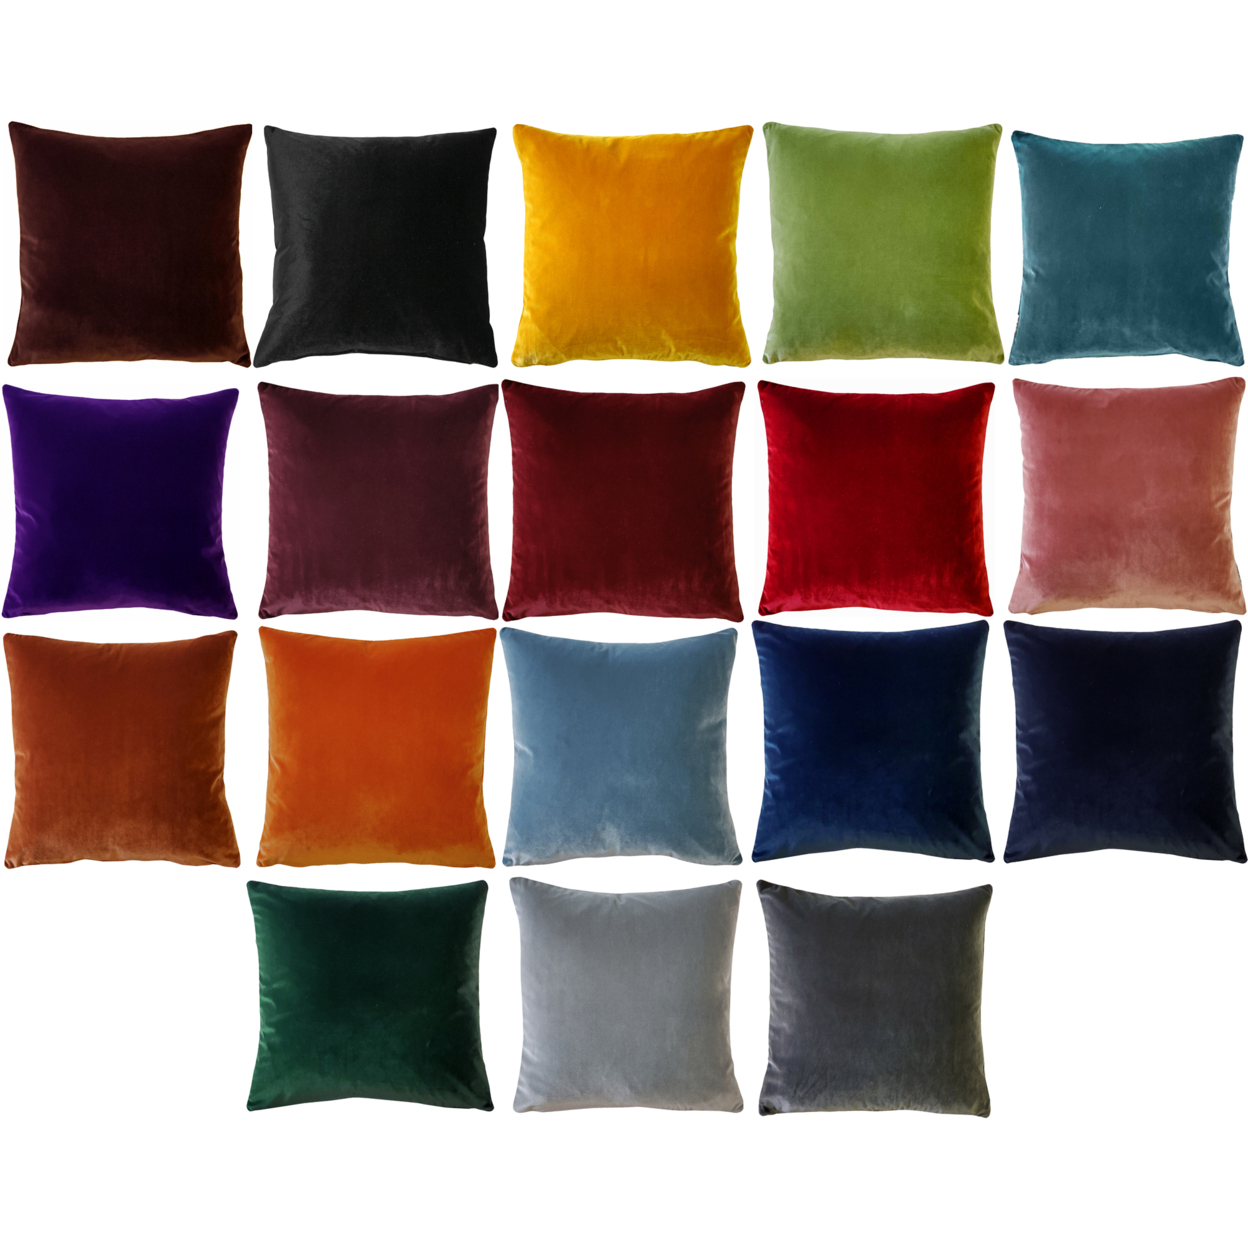 Castello Velvet Throw Pillows, Complete Pillow With Polyfill Pillow Insert (18 Colors, 3 Sizes) - Graphite Gray, 20x20